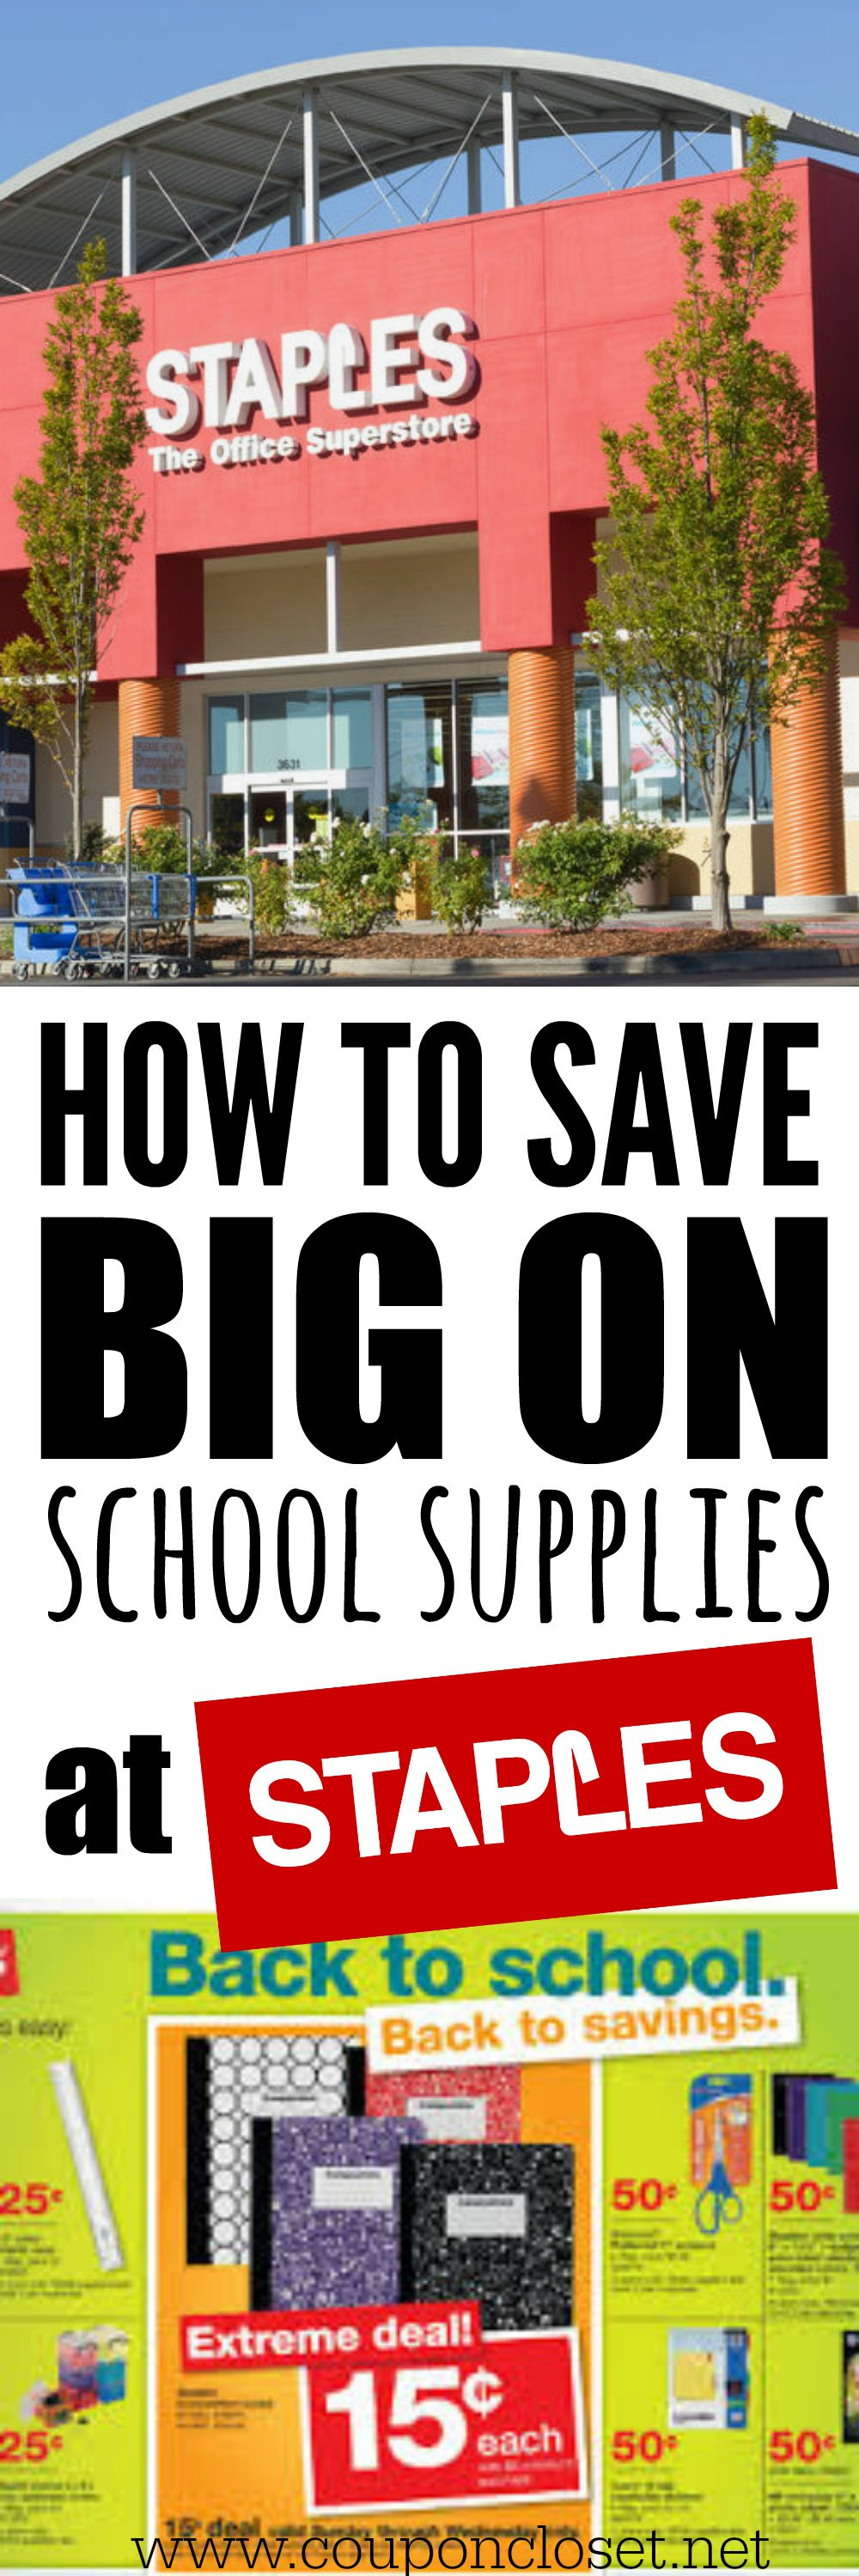 Staples Back To School
 Save at Staples with the back to school sales tips